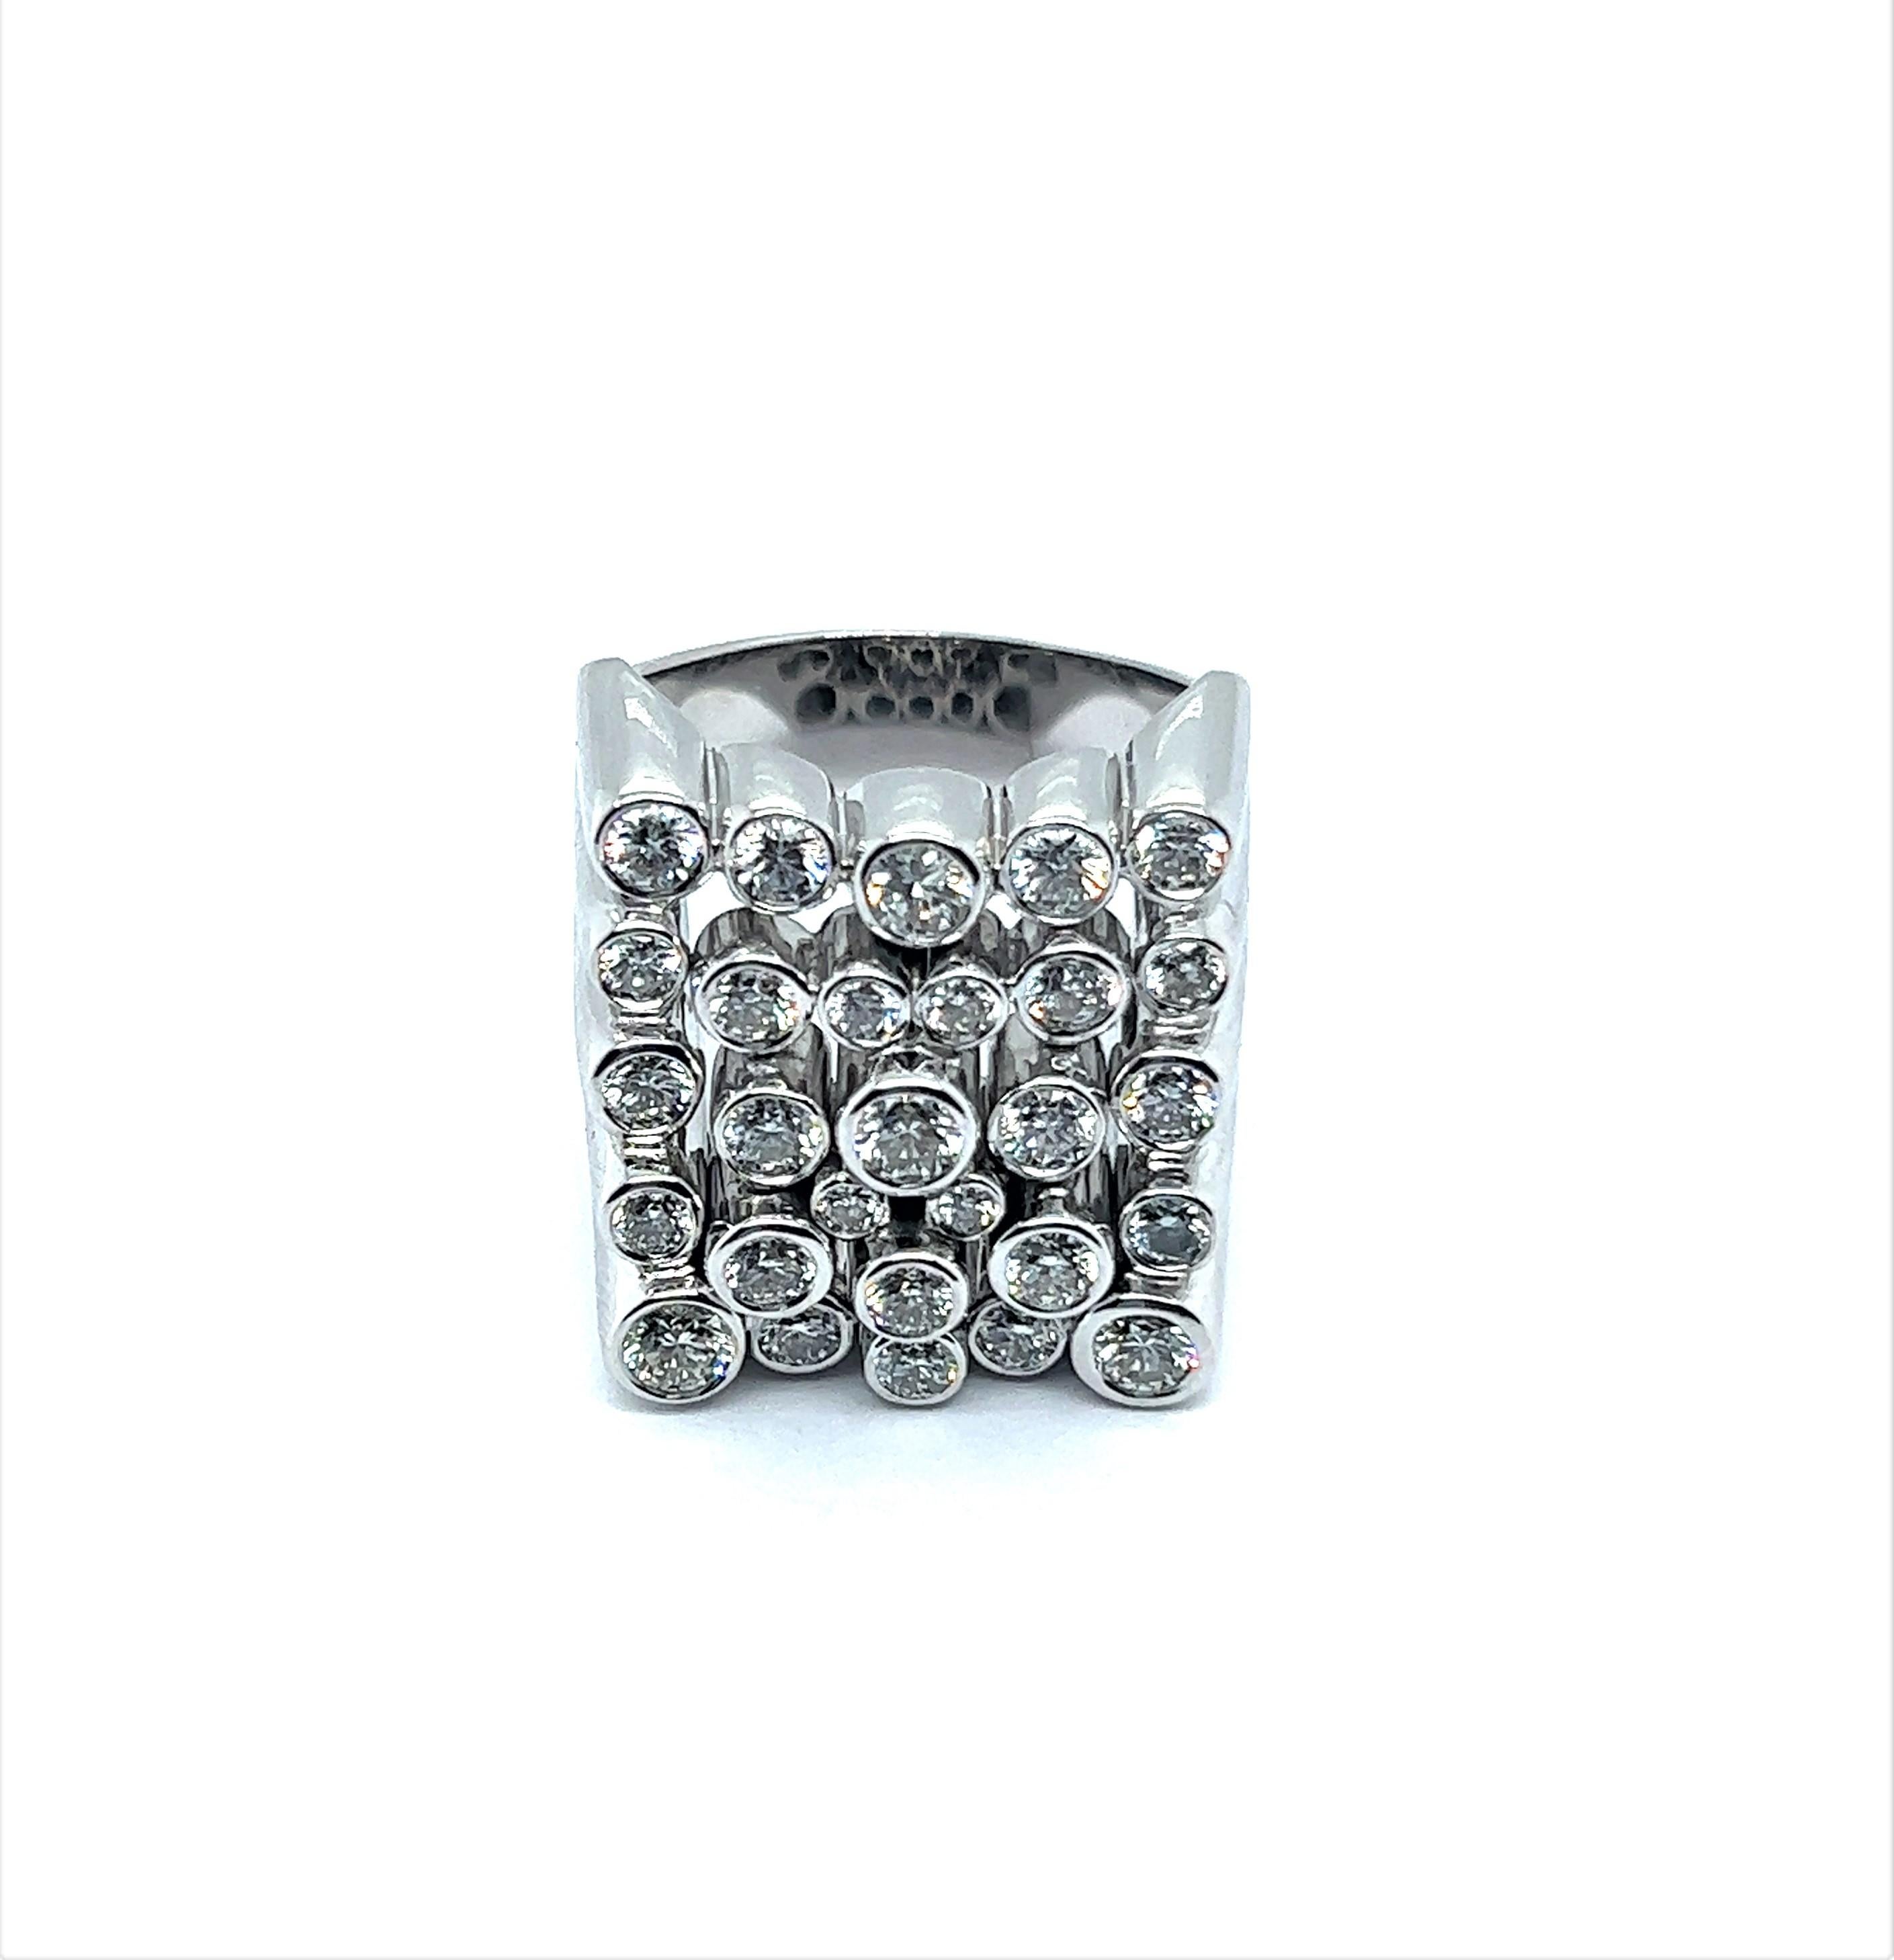 Indulge your senses in an exquisite jewellery creation - a statement diamond ring that effortlessly marries boldness with refined elegance. This exceptional piece is an ode to contemporary design and geometric architectural inspiration, exuding a